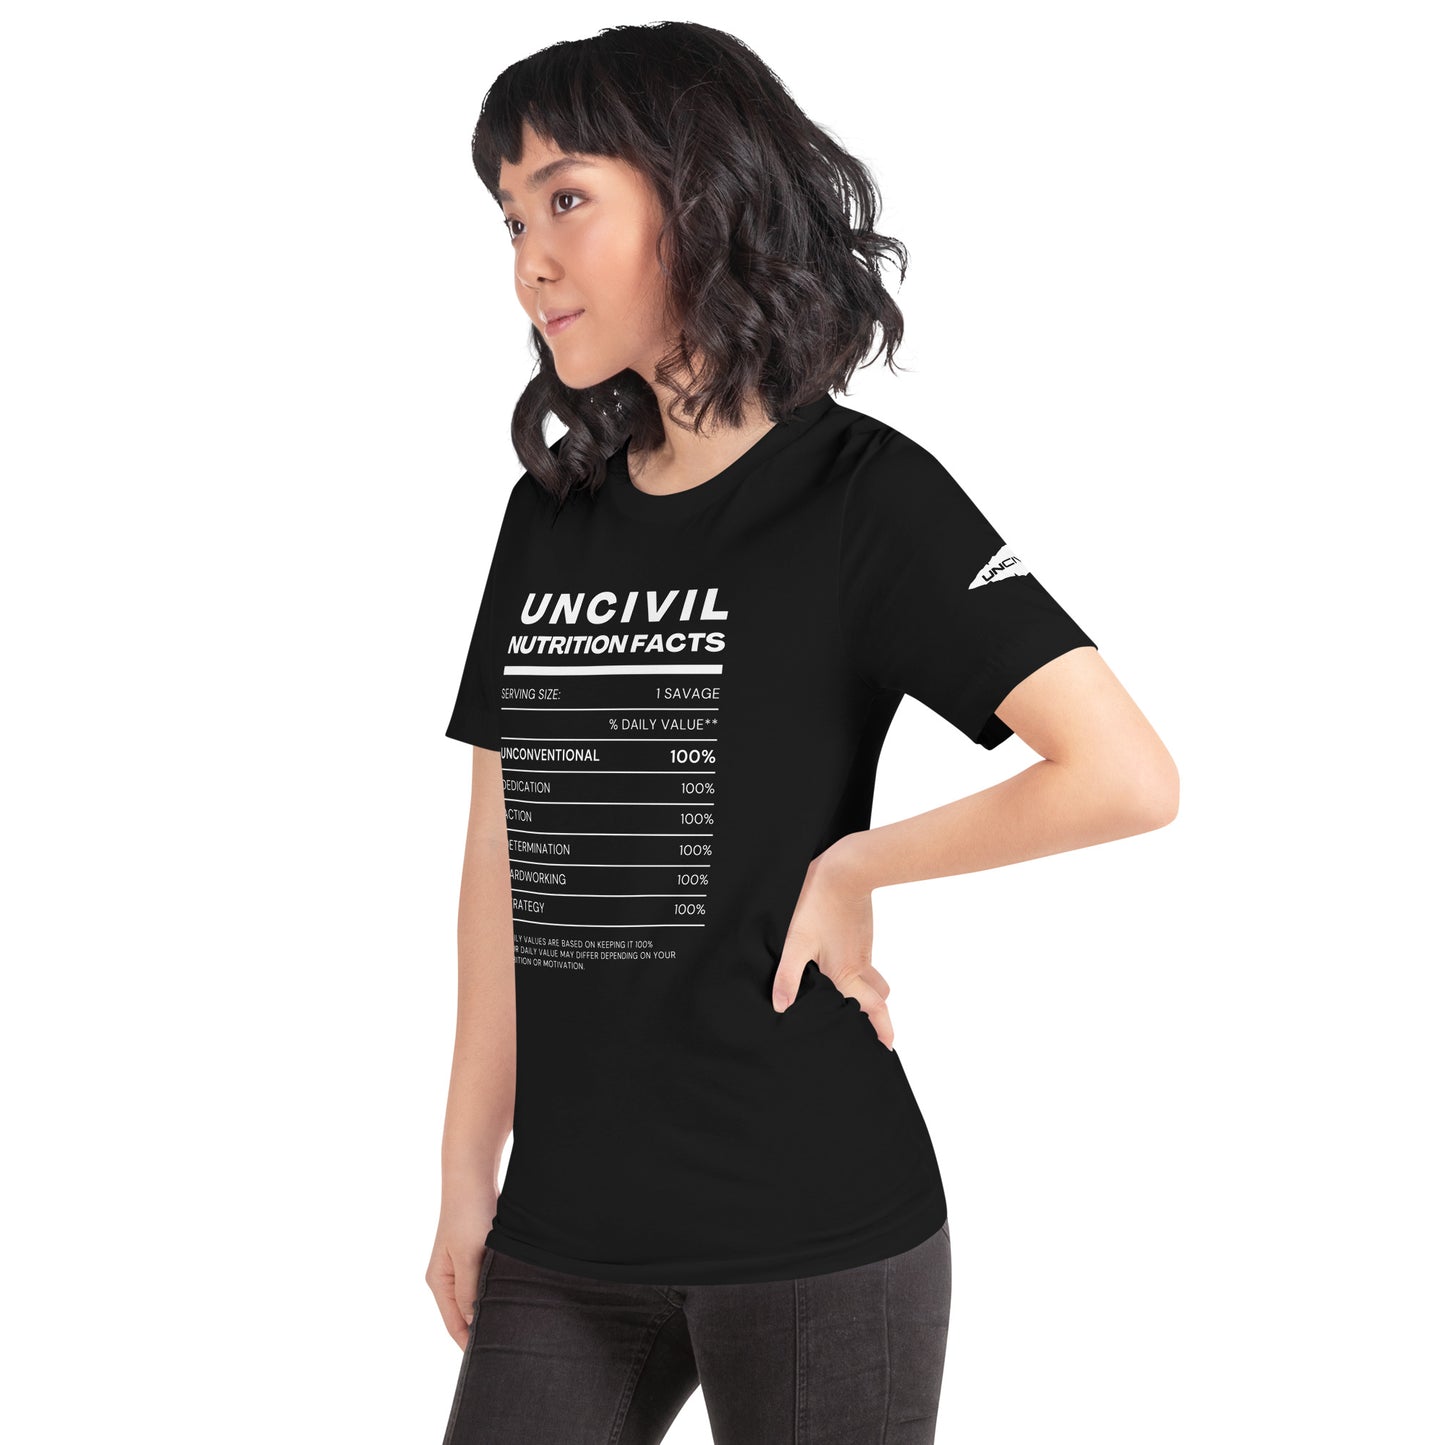 Our UNCIVIL Nutritional facts, Unconventional, dedicated, action, determination, hardworking, & strategy. Black unisex shirt.